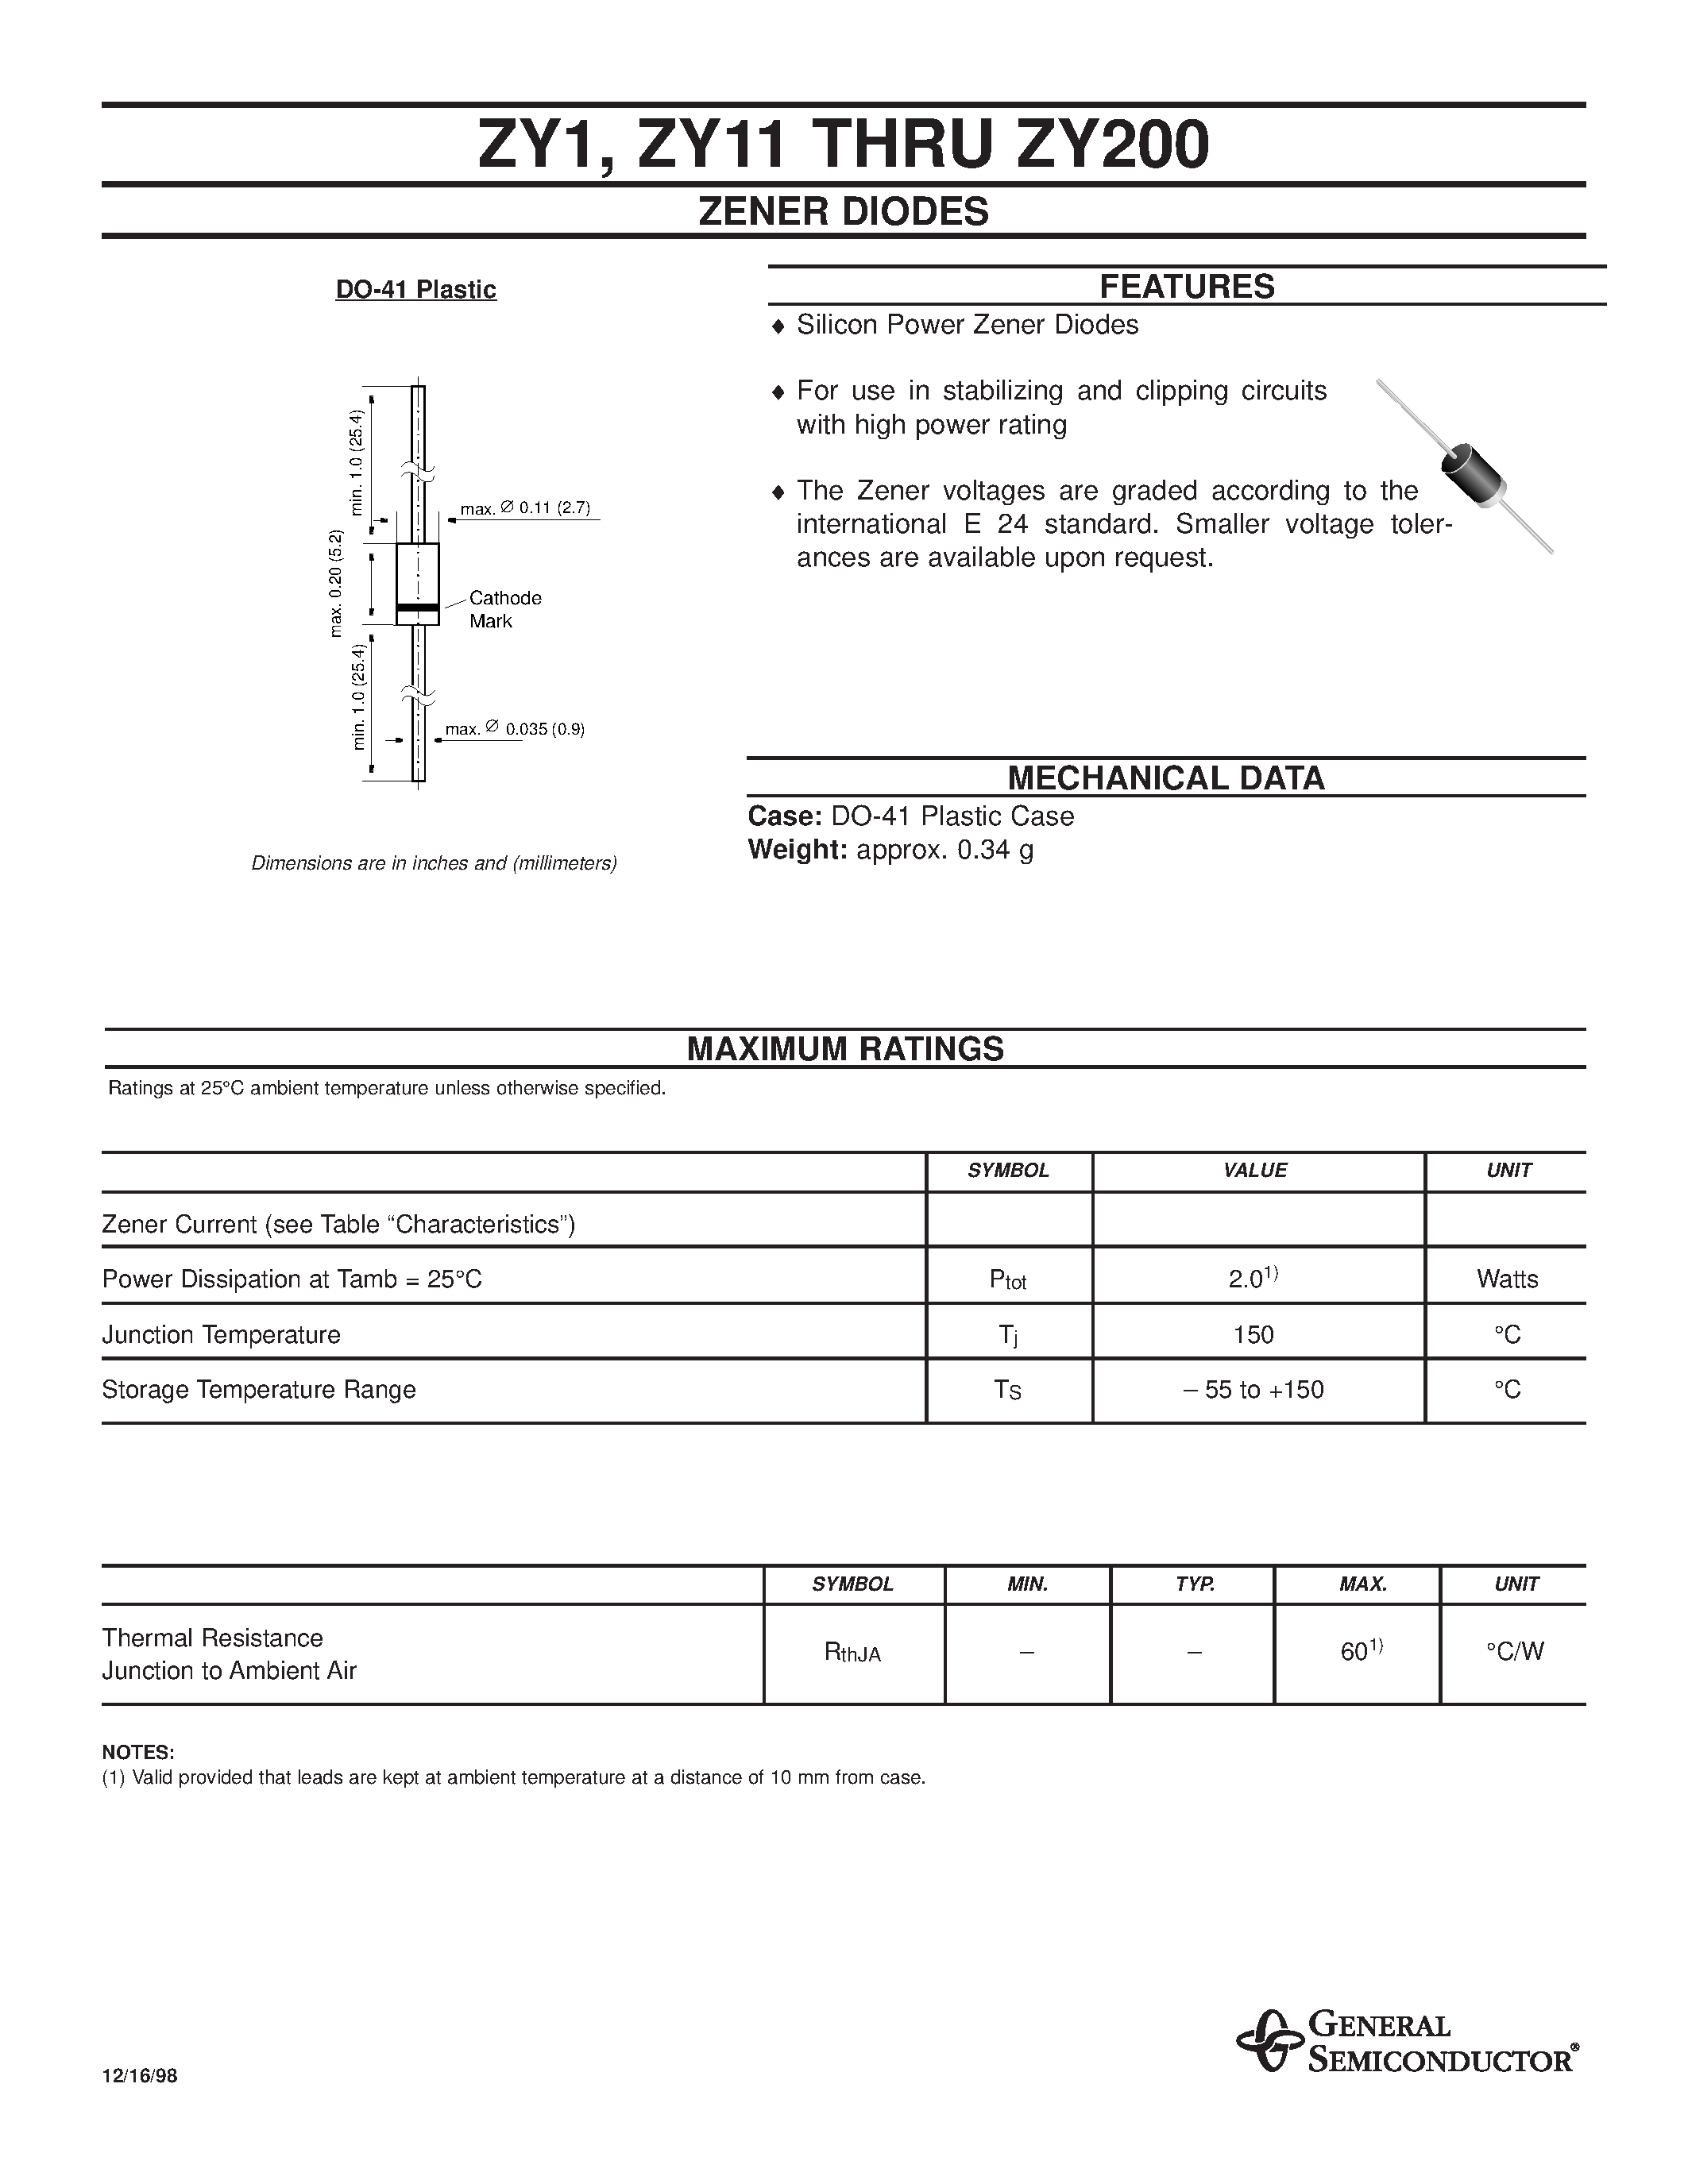 Datasheet ZY51 - ZENER DIODES page 1